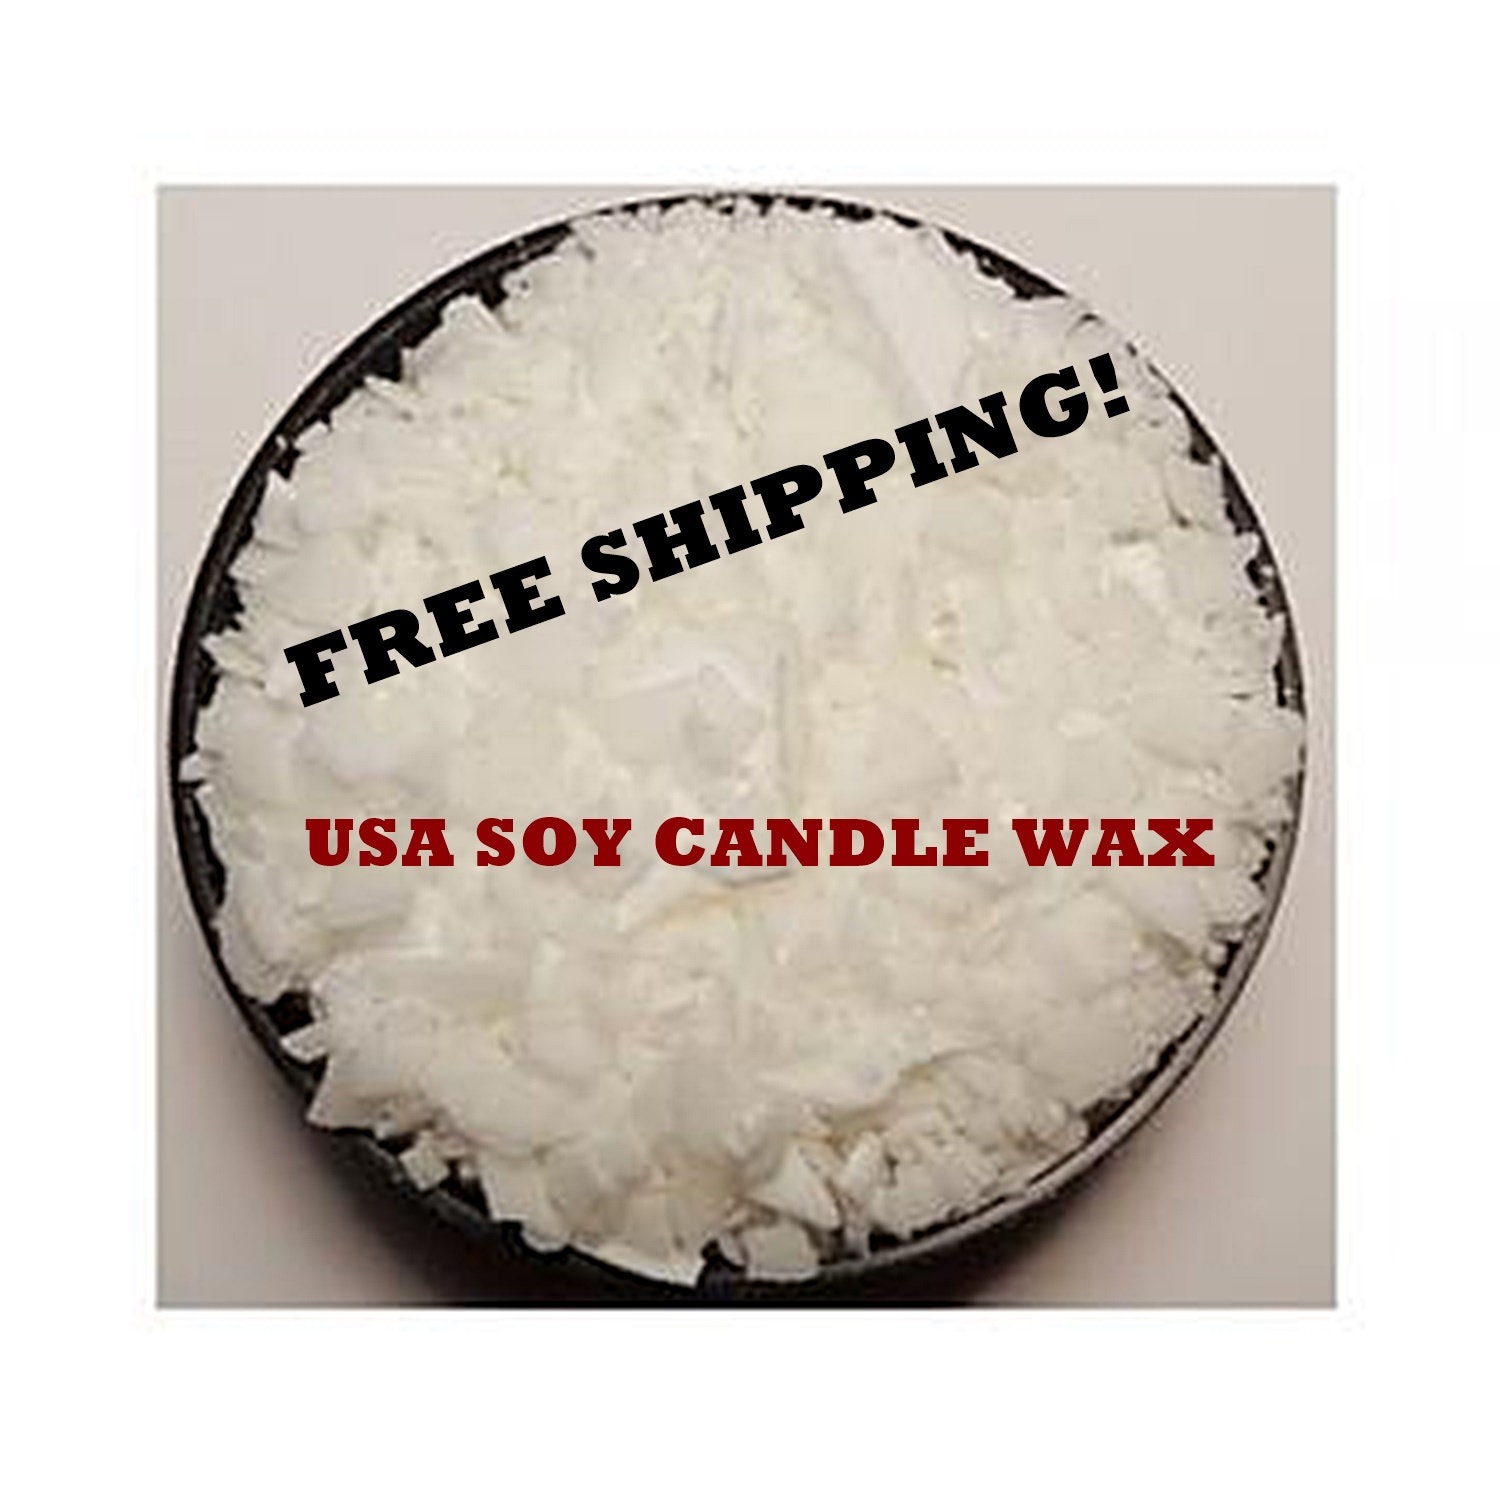 Candle Wax, Golden Brand 415 Natural Soy Wax, Candle Making